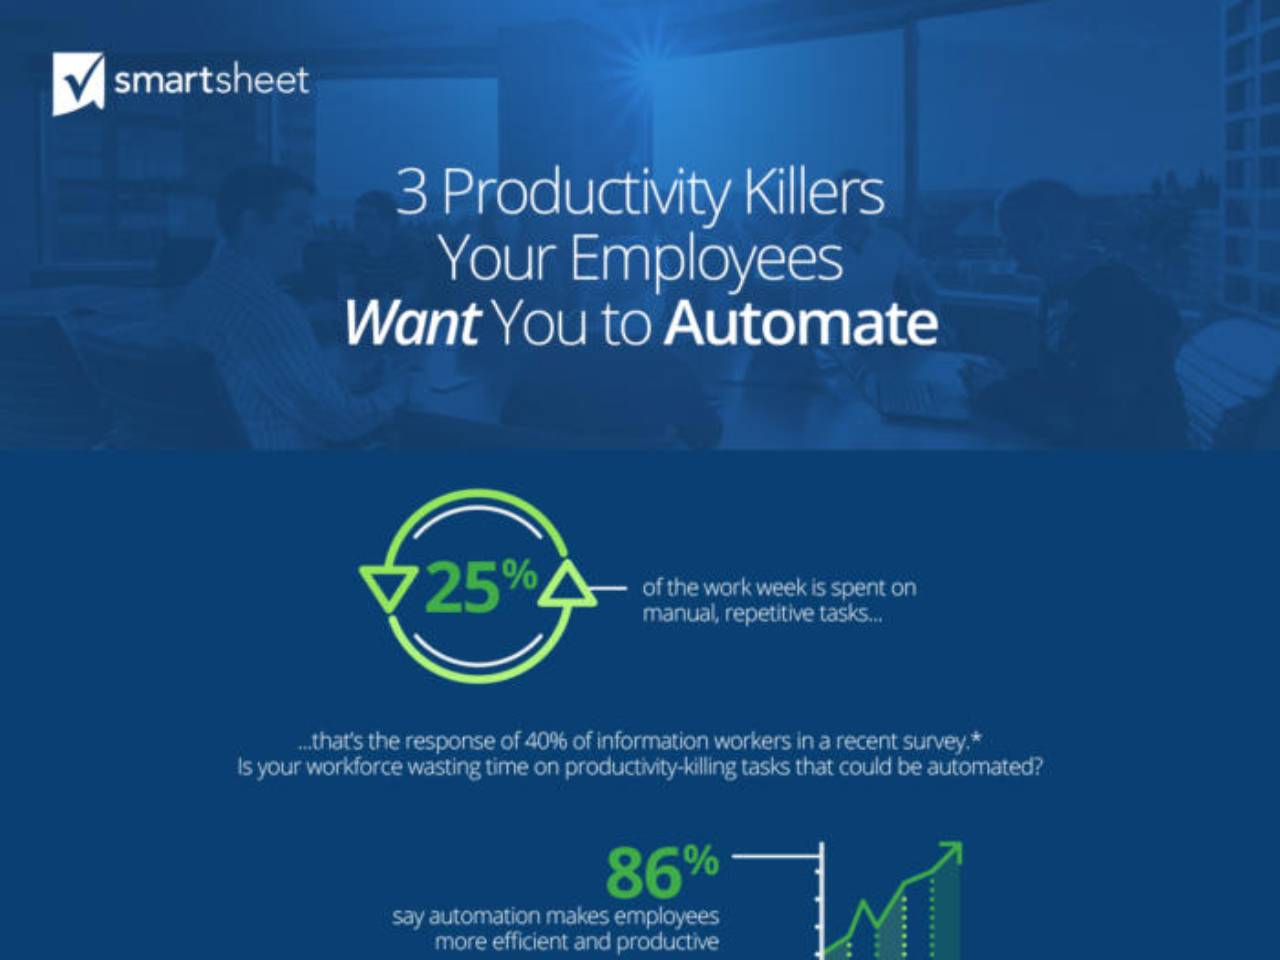 3 Productivity-Killing Tasks Your Employees Want You To Automate (Infographic)